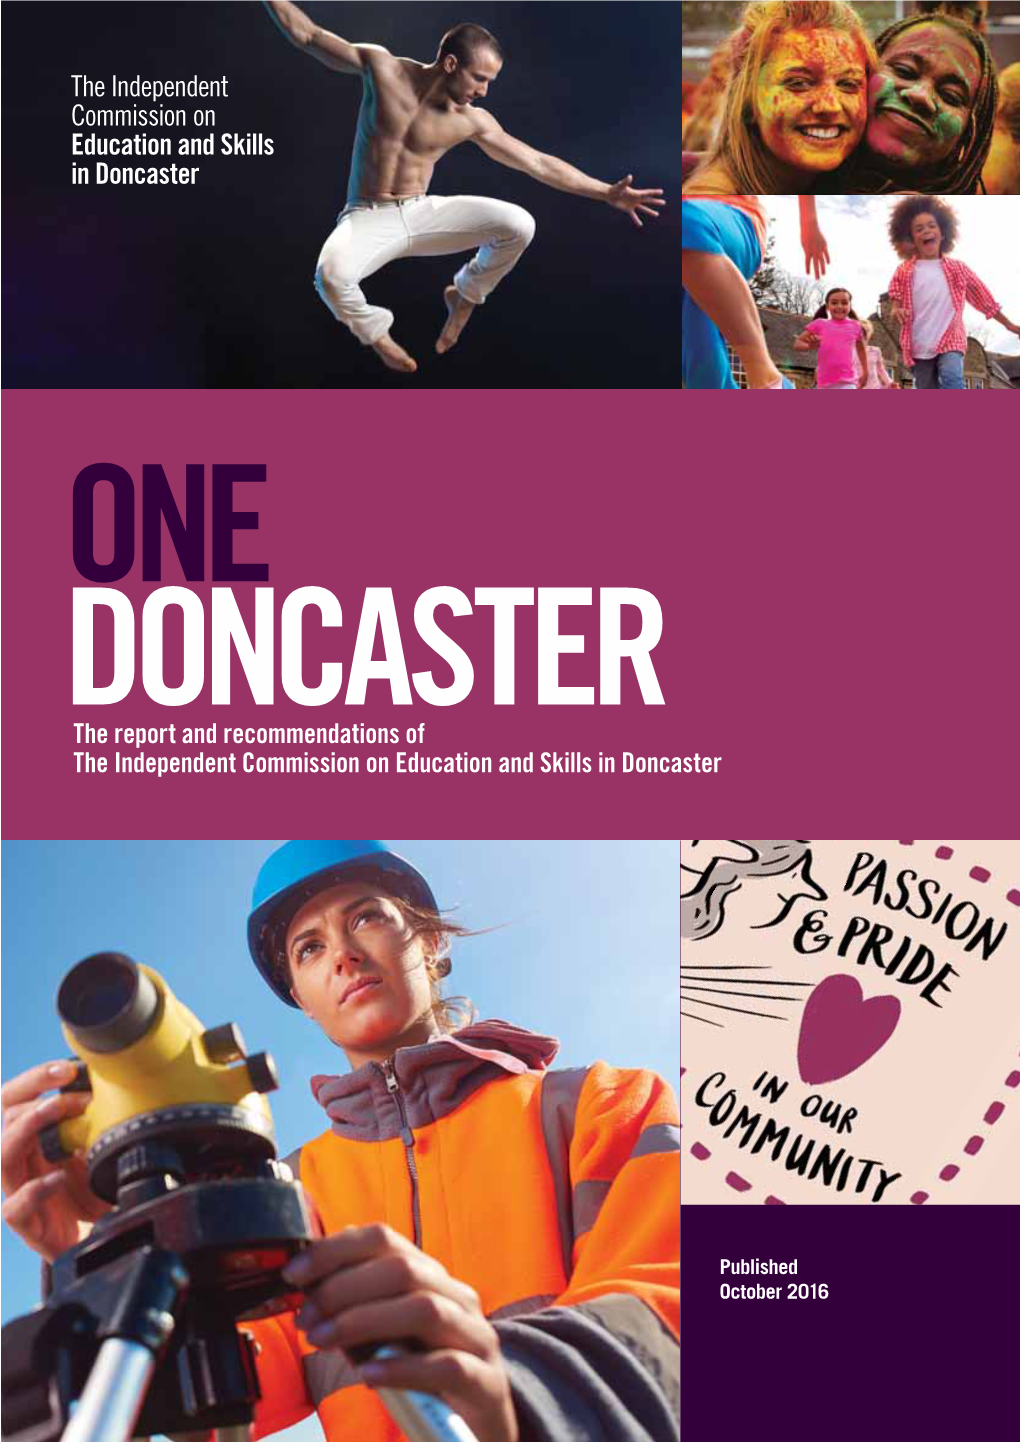 The Independent Commission on Education and Skills in Doncaster